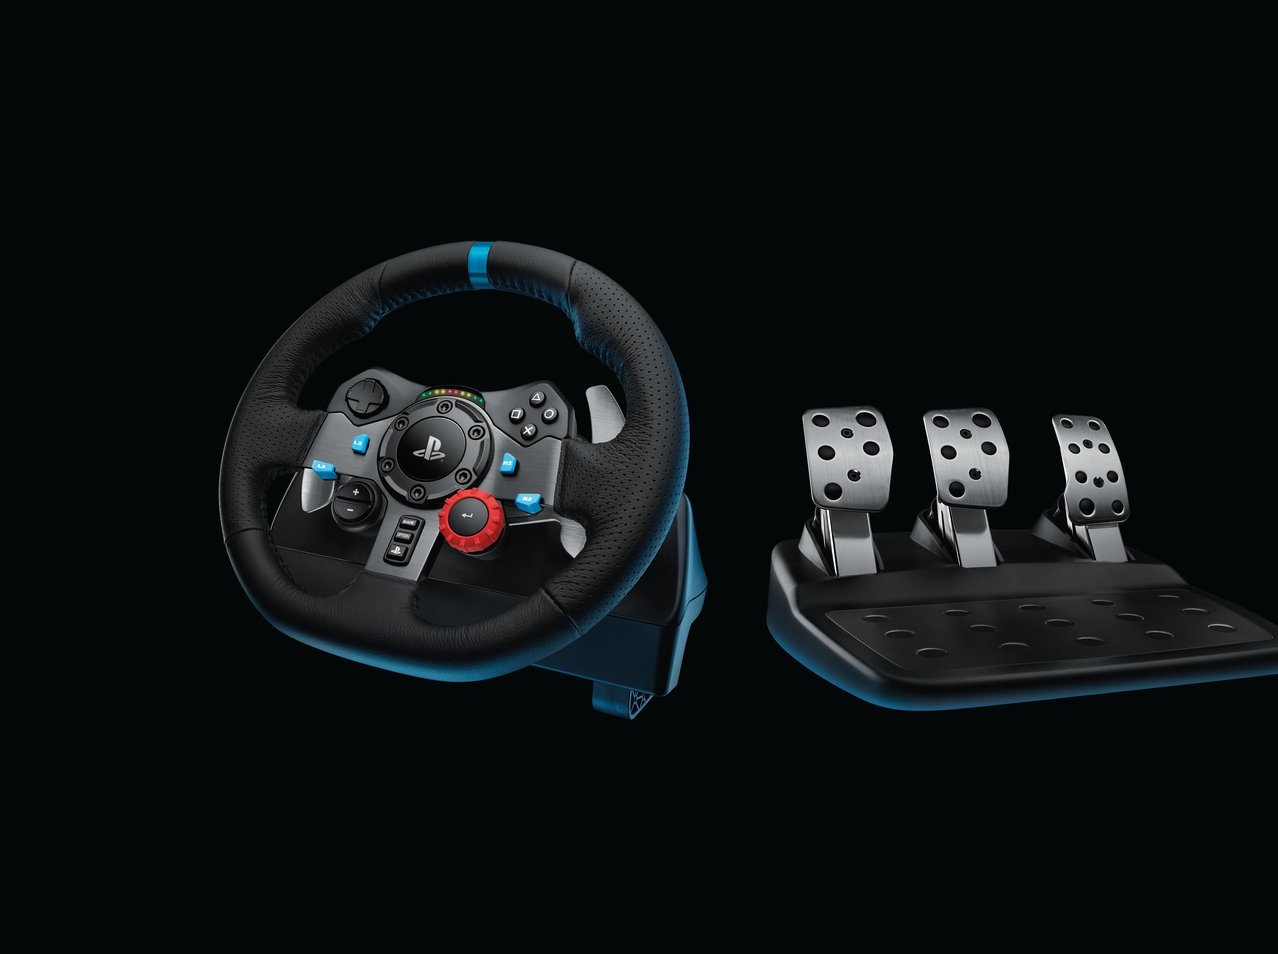 VOLANTE LOGITECH DRIVING FORCE G29 PLAYSTATION